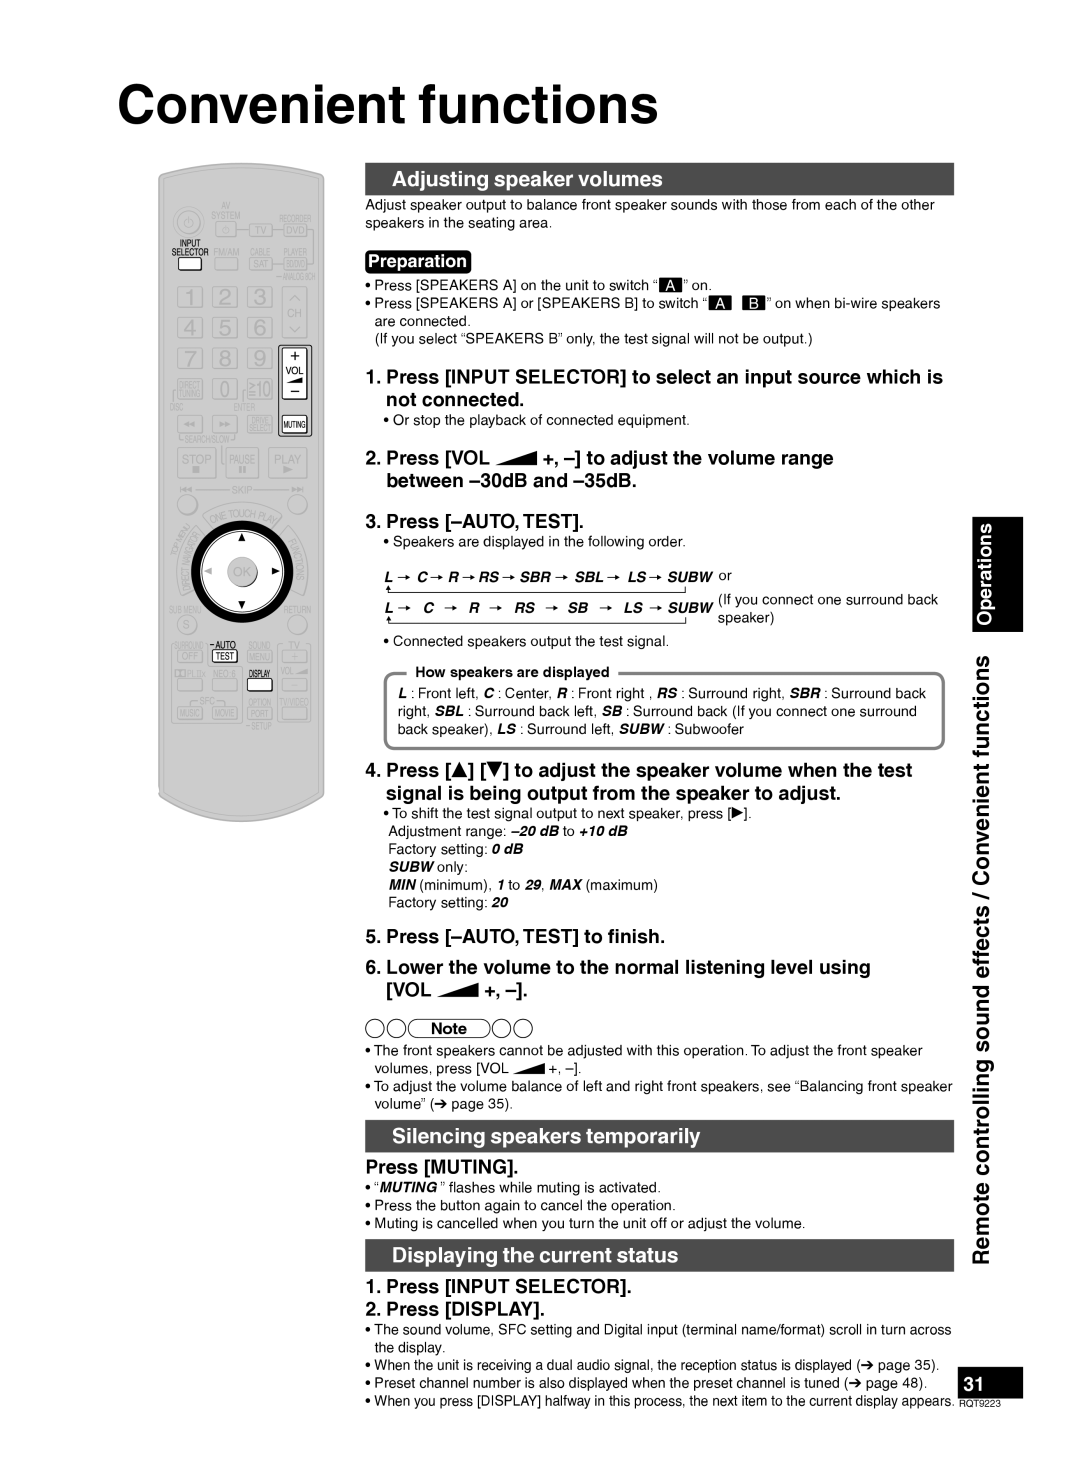 Panasonic H0608VC0 Convenient functions, Adjusting speaker volumes, Silencing speakers temporarily, Press VOL, Operations 